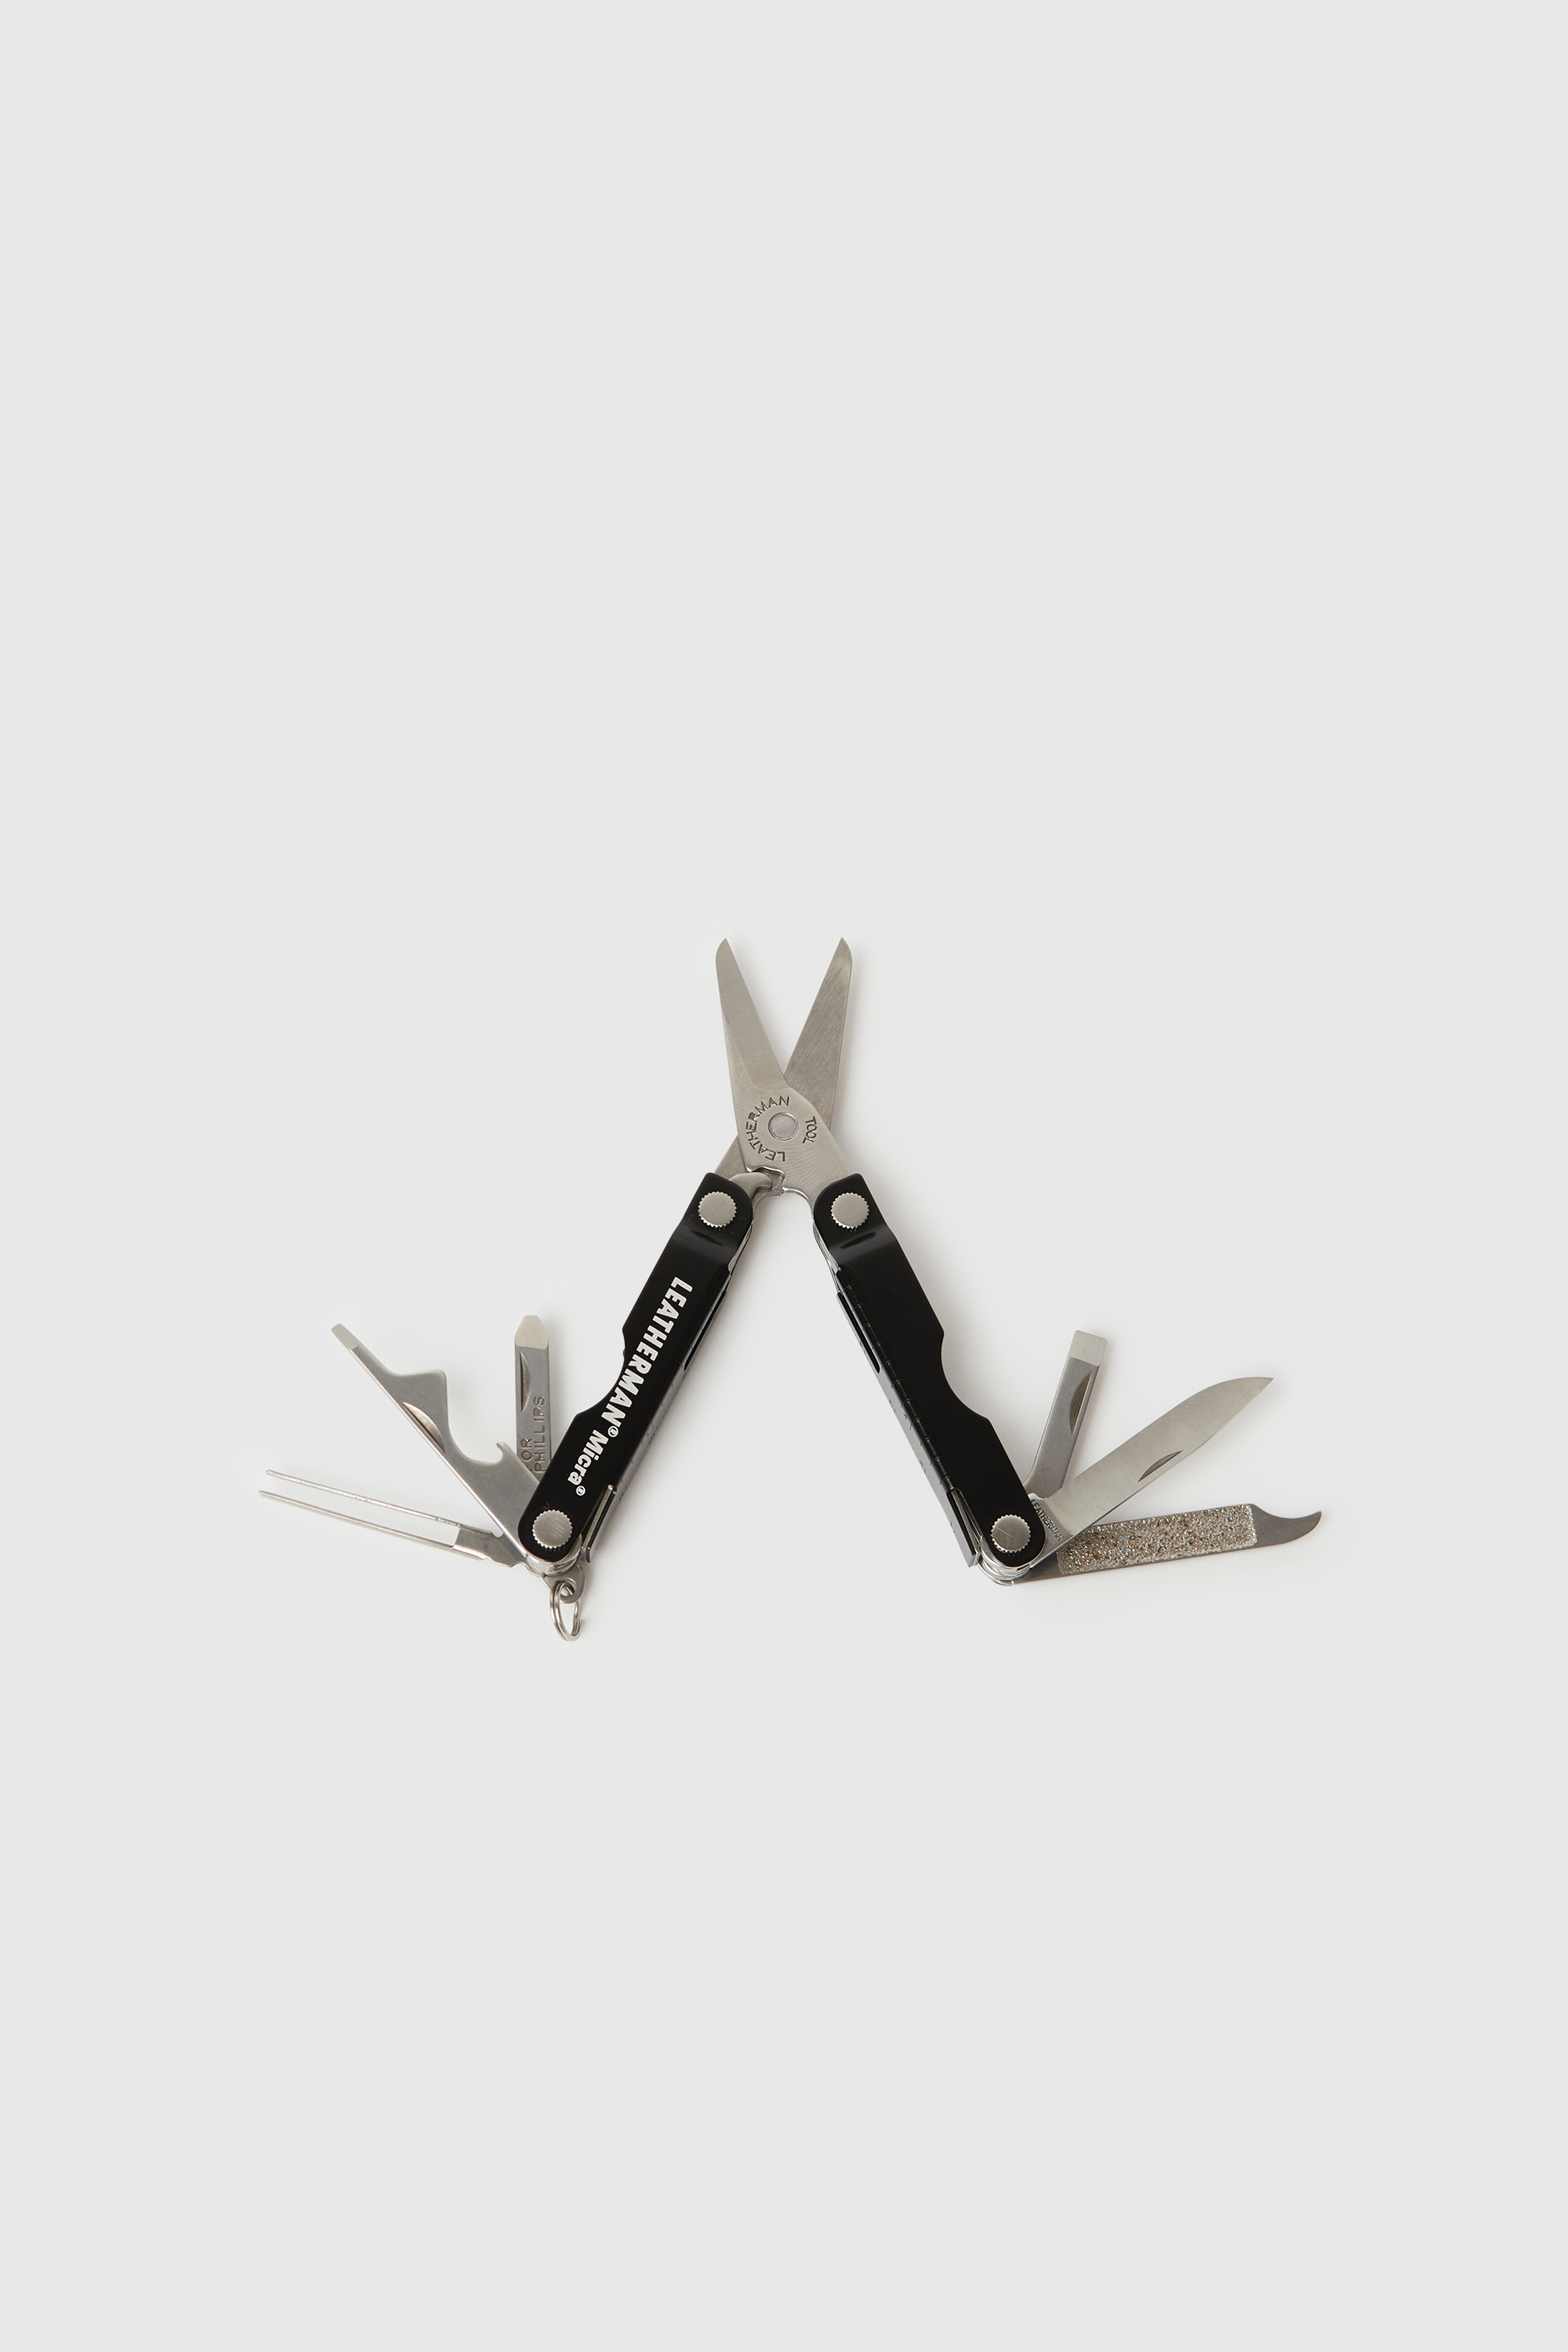 Leatherman Micra Multi-tool • See best prices today »